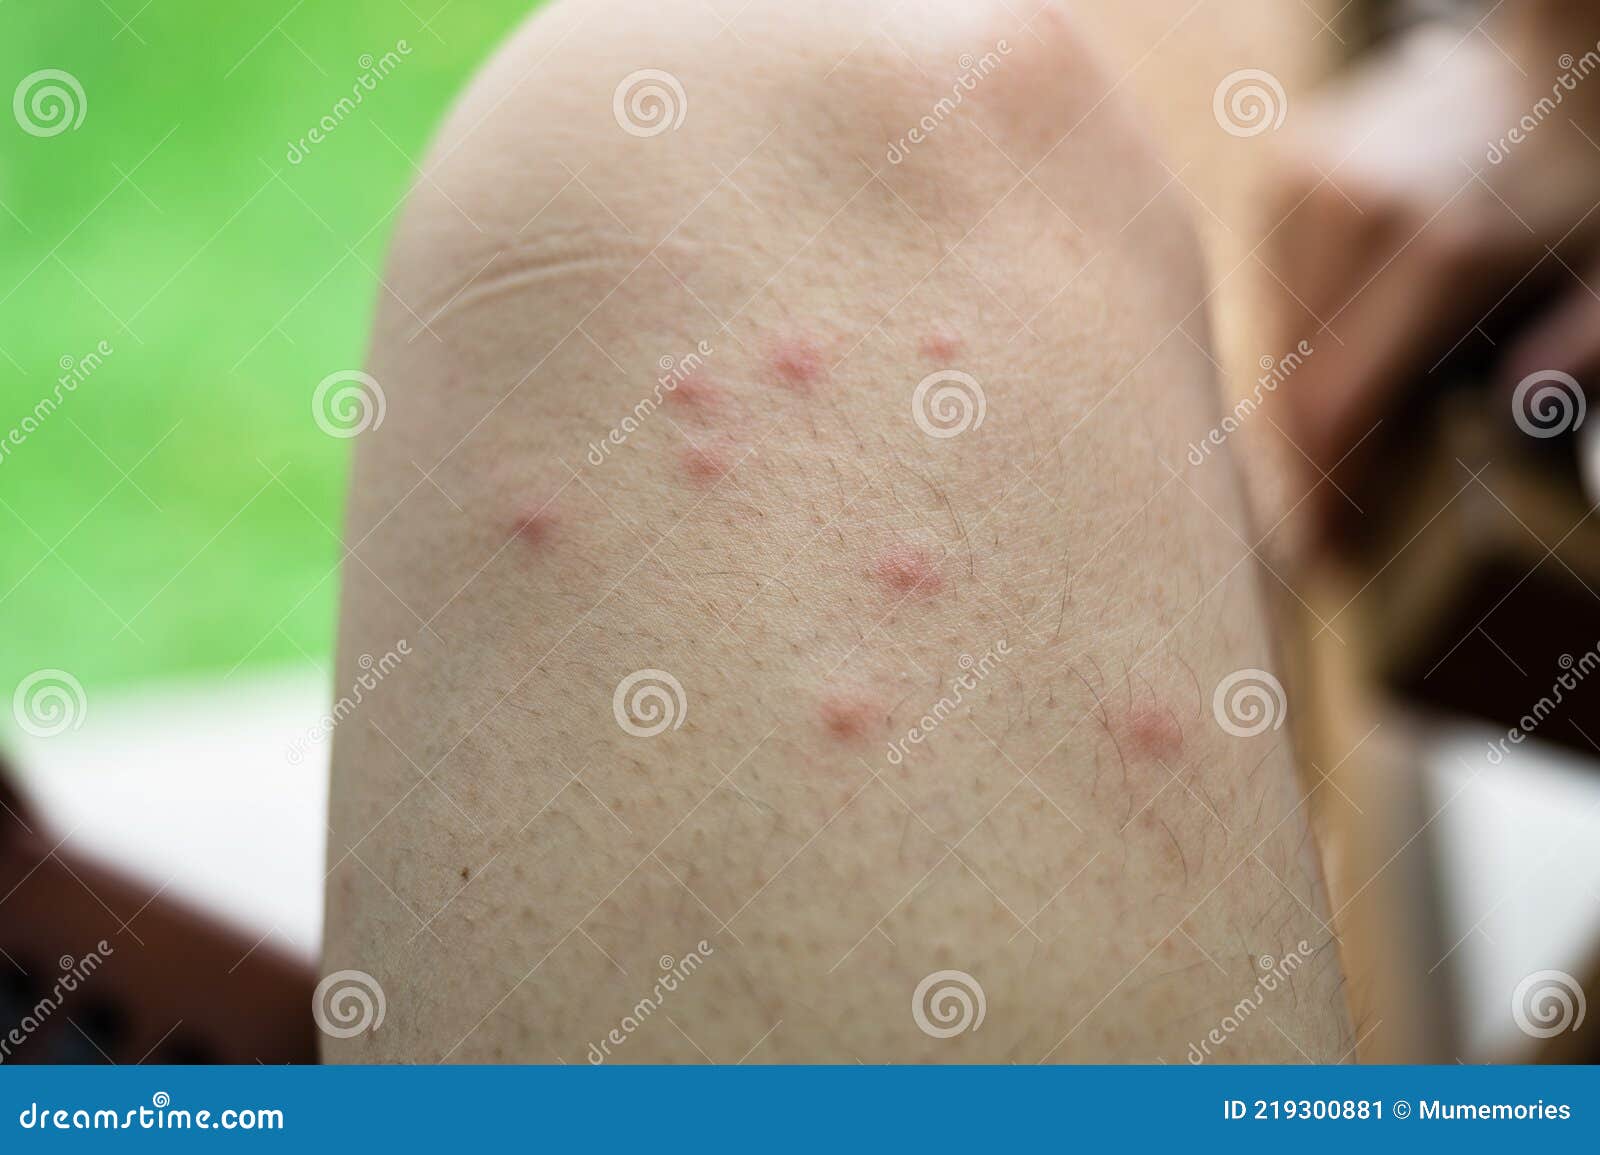 Swollen Blisters On The Skin Caused By Mosquito Bites At Thigh Stock Photo  - Download Image Now - iStock